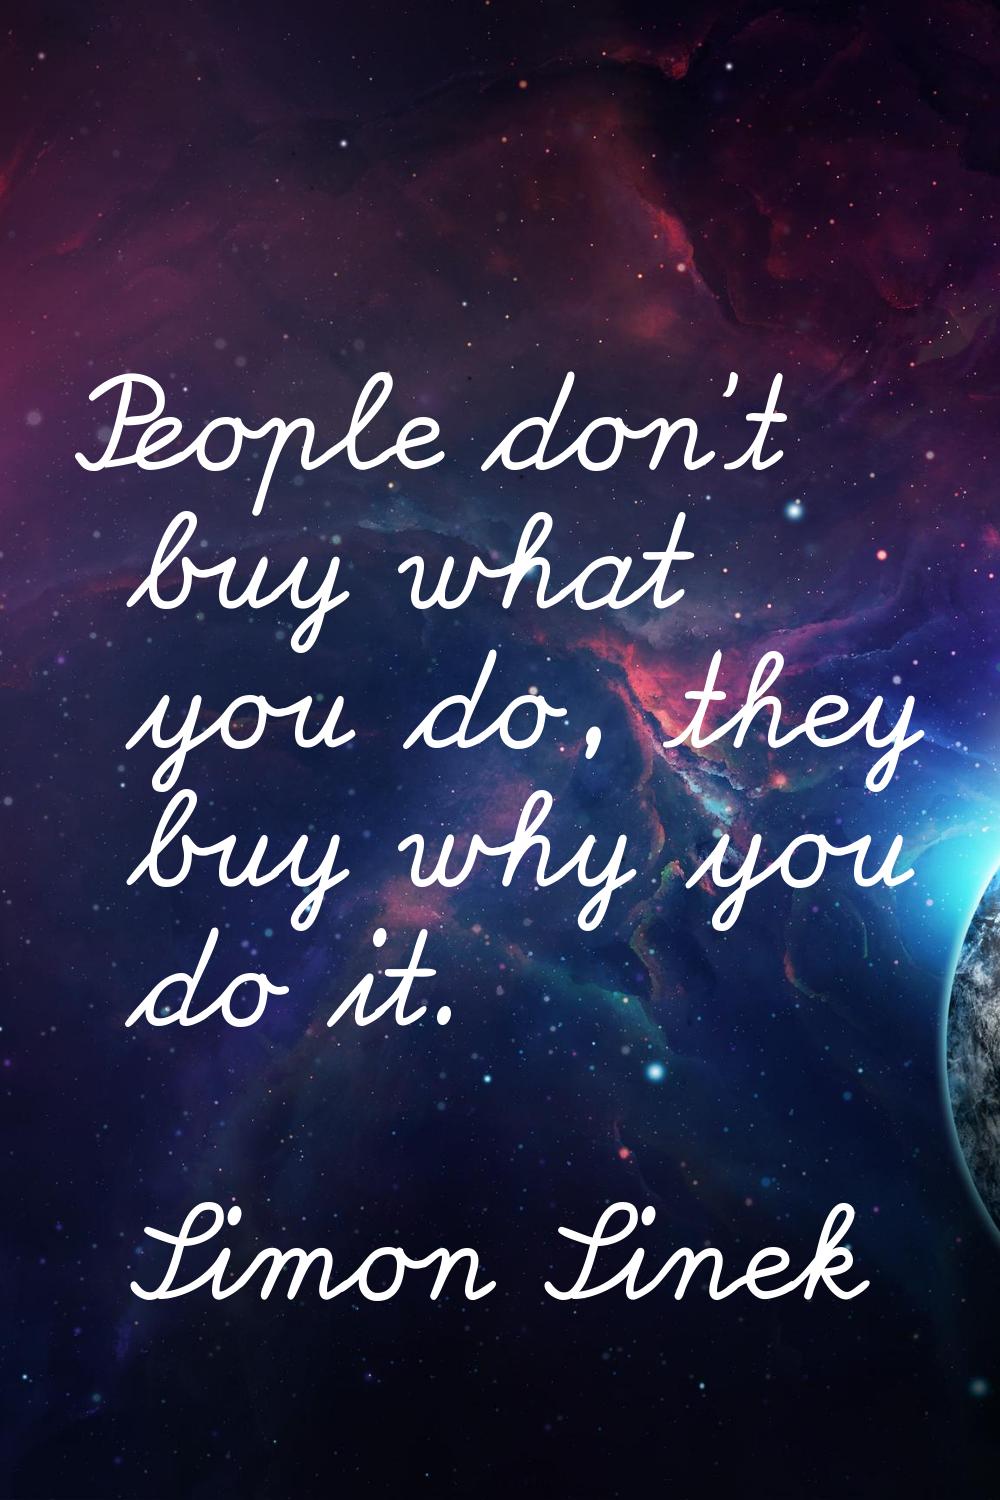 People don't buy what you do, they buy why you do it.